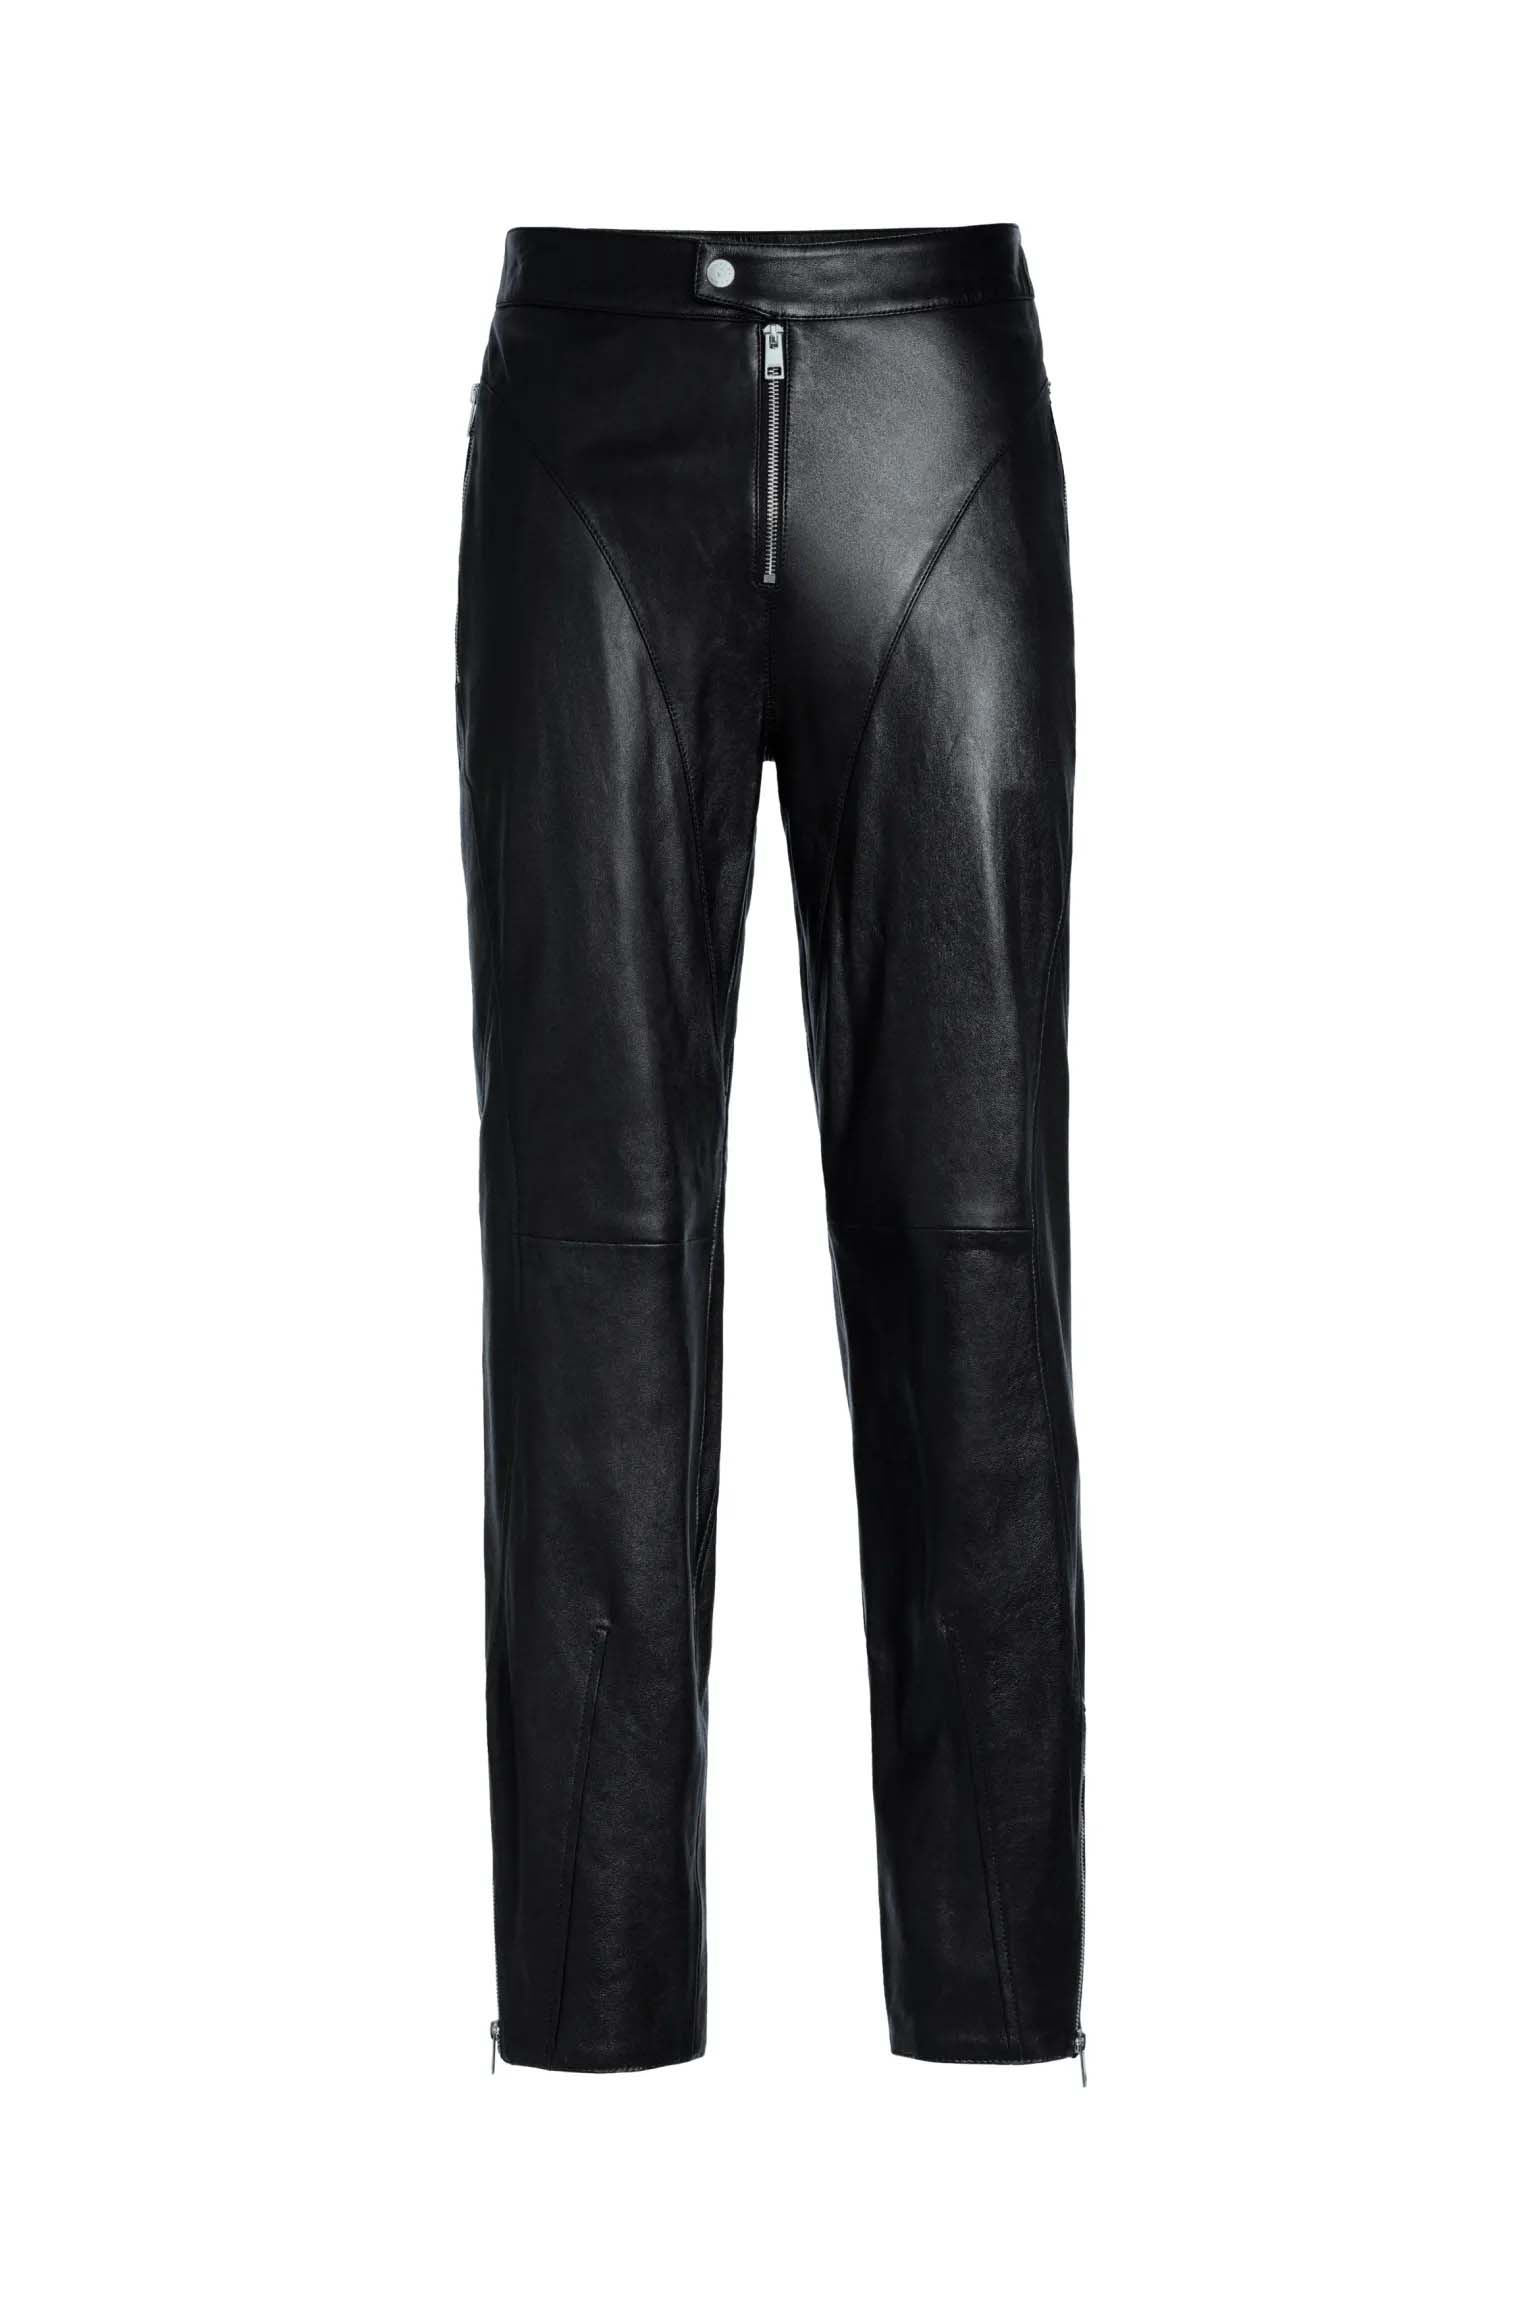 Homisy Leather Pants for Men Motorcycle Pant for Bikers India | Ubuy